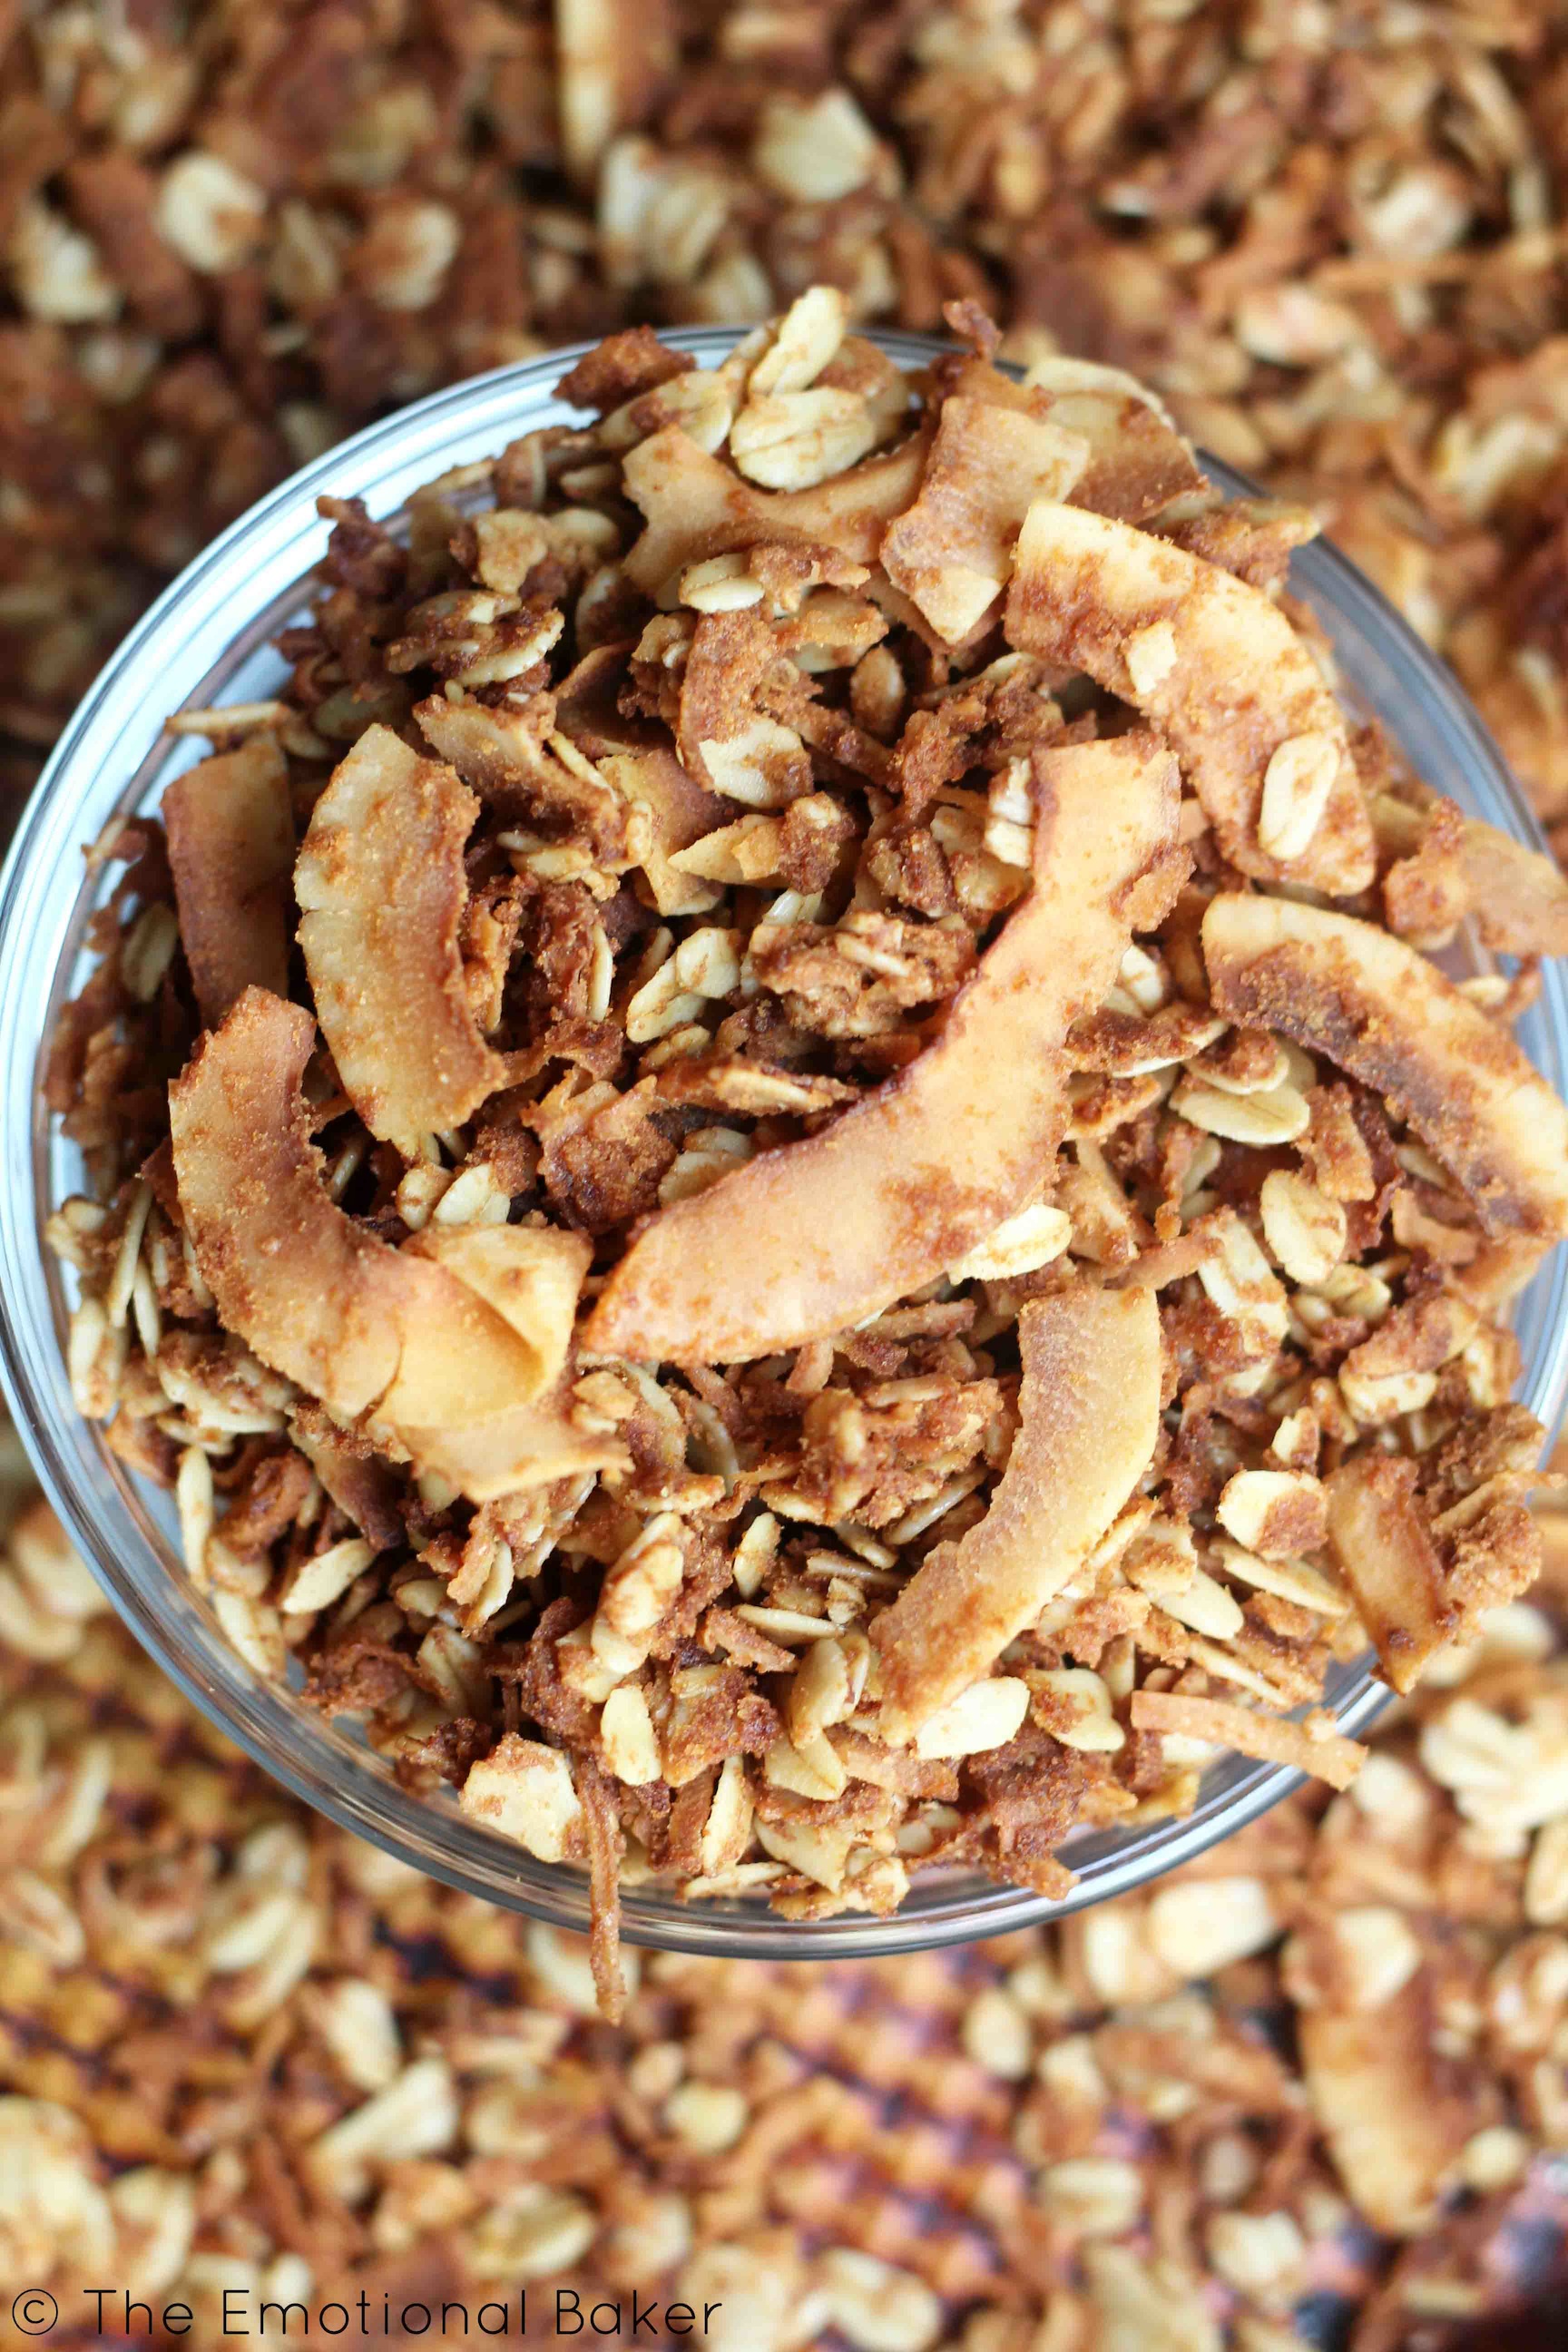 The ultimate coconut lover's granola - made with coconut oil, coconut flour, coconut sugar - and of course - lots of crunchy coconut flakes!